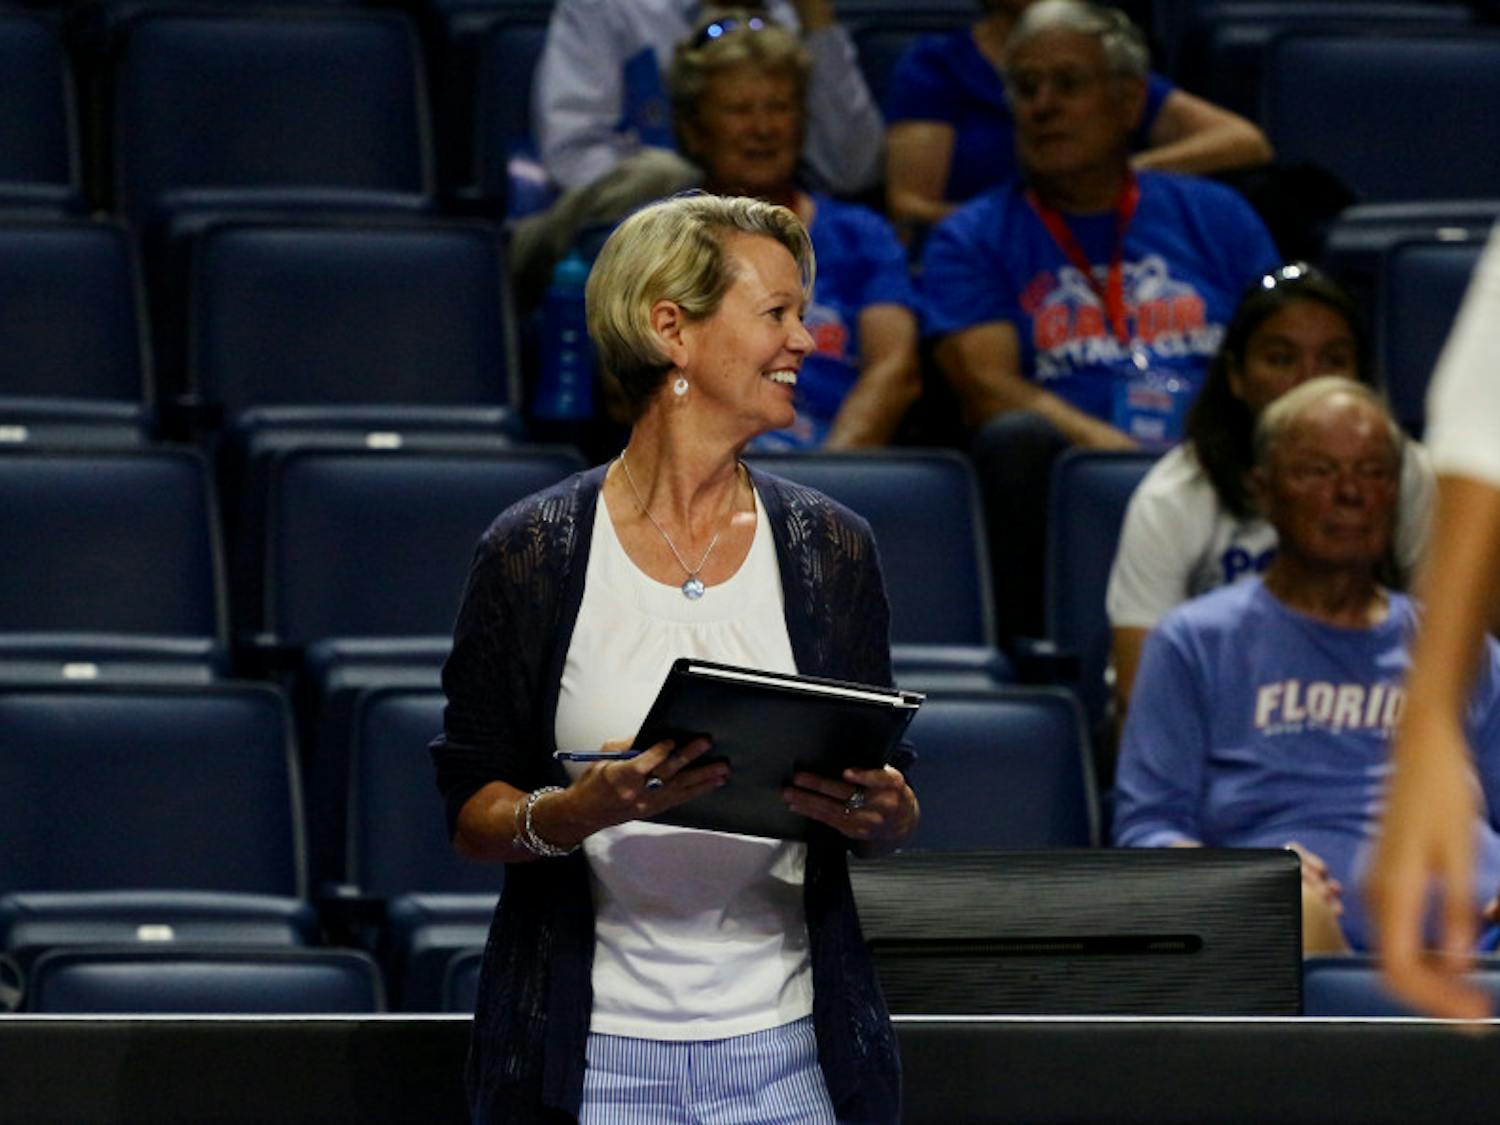 UF coach Mary Wise smiles during Florida's 3-0 win against Florida A&amp;M on Sept. 15, 2017, in the O'Connell Center.